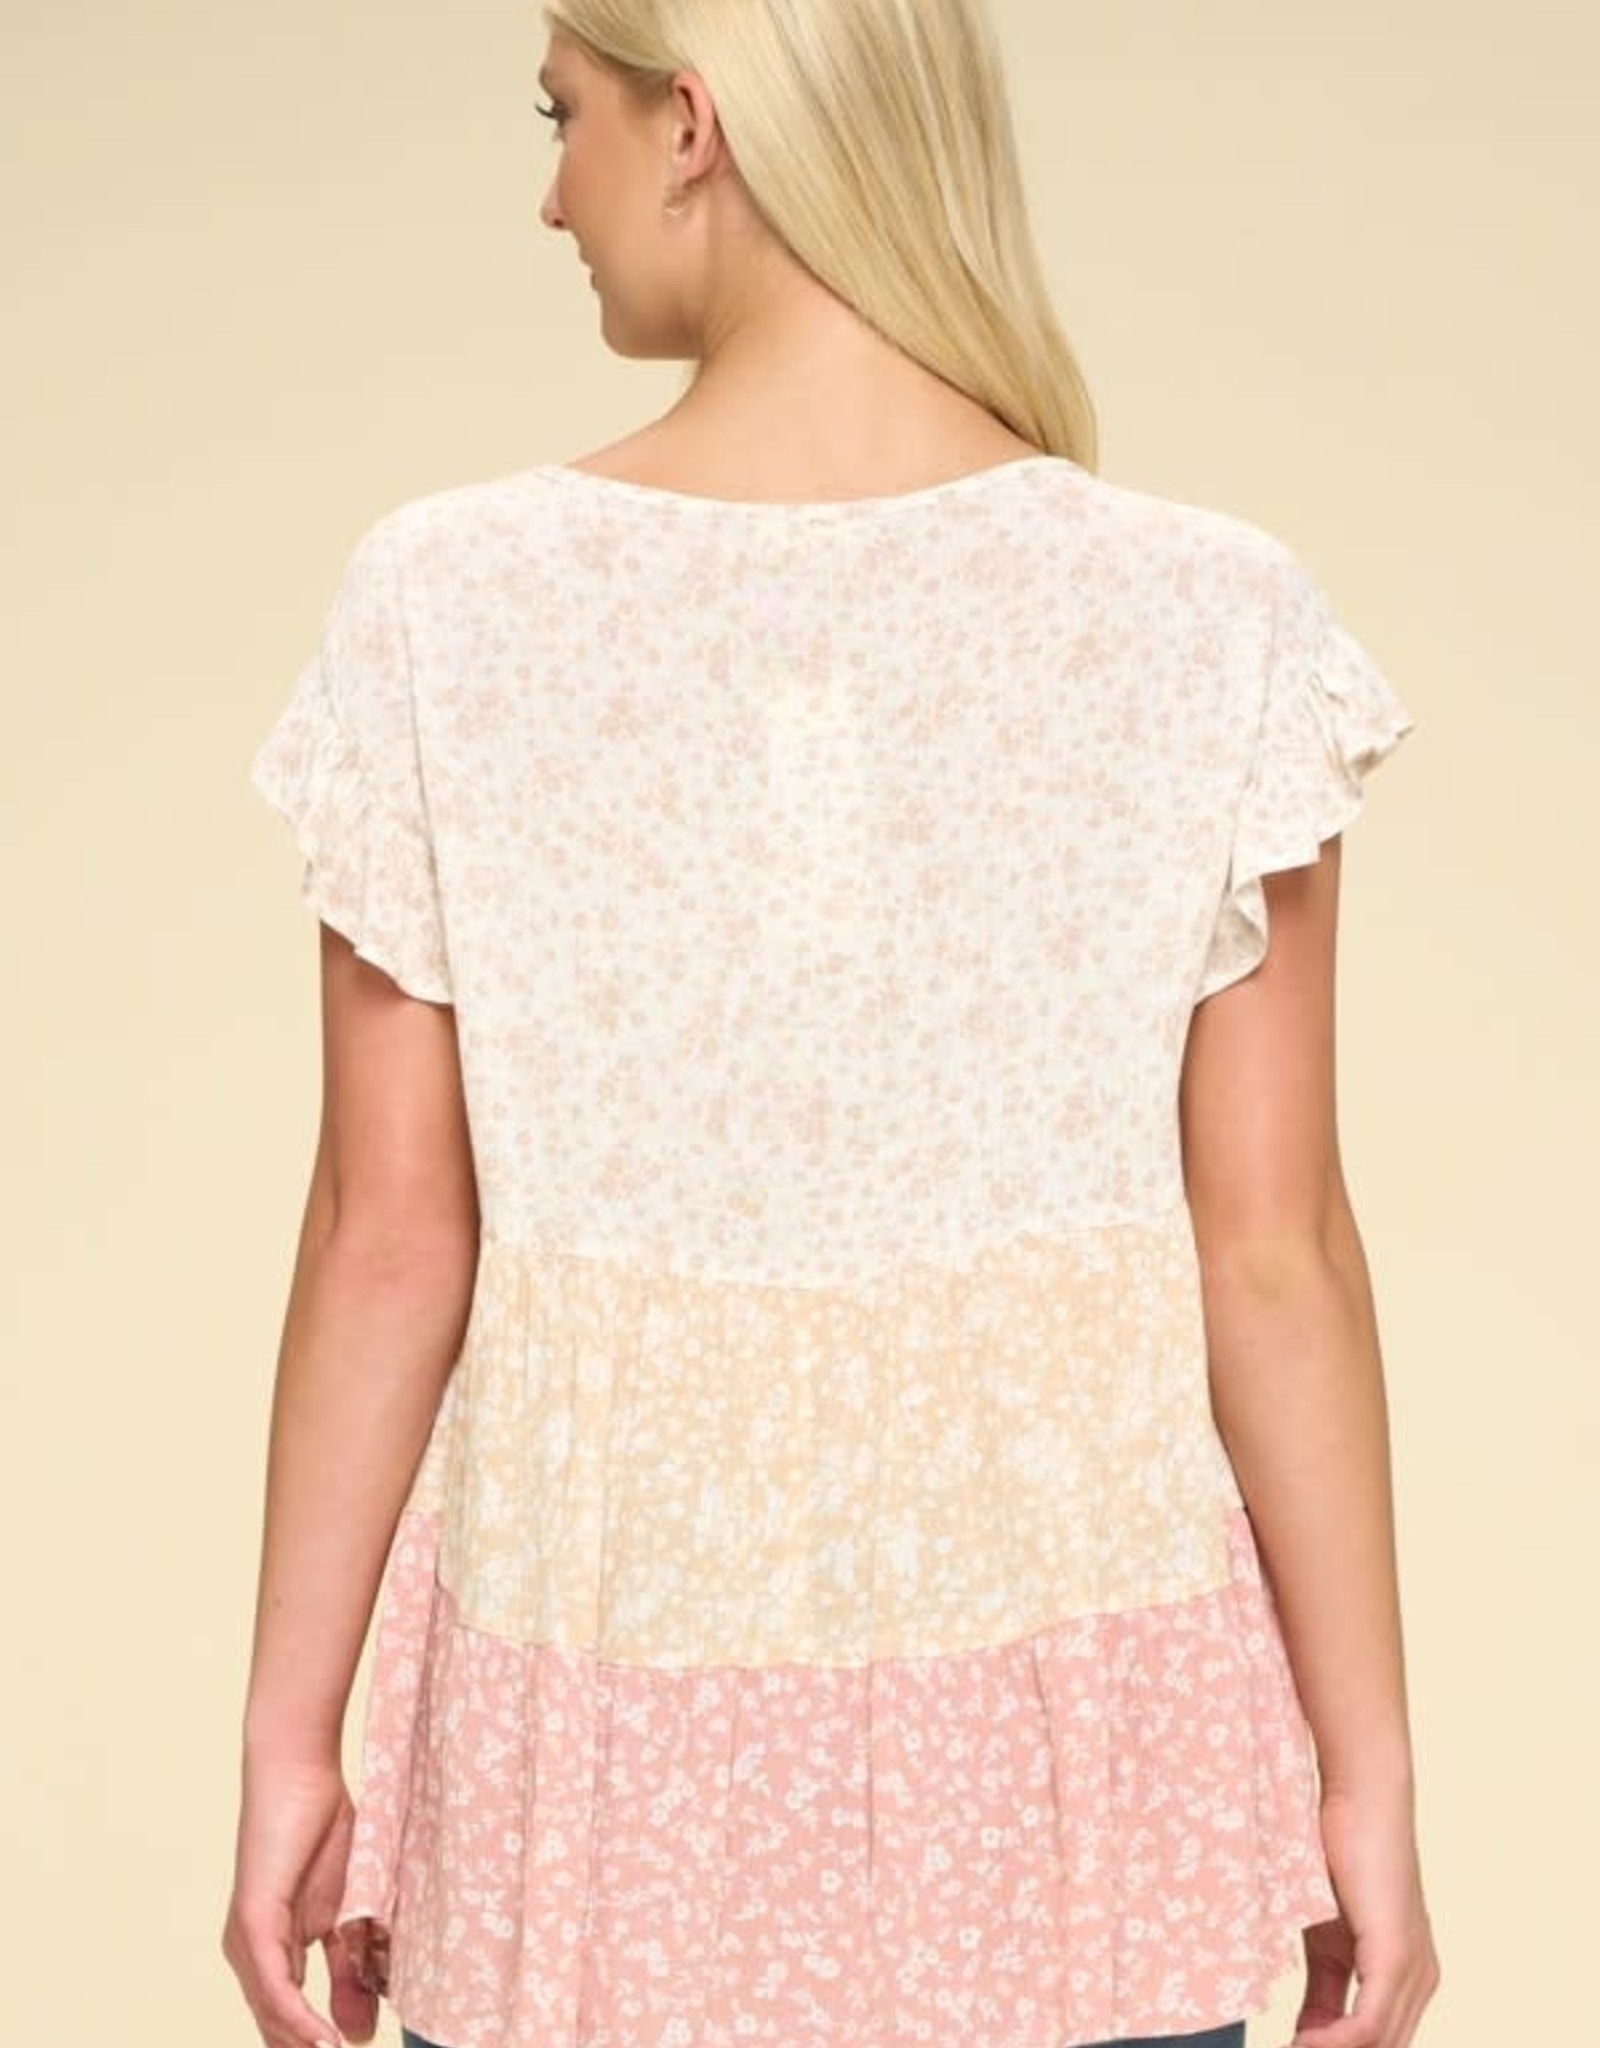 Oddi Color Block Printed Top, Round Neckline, Ruffled Short Sleeves and Bottom